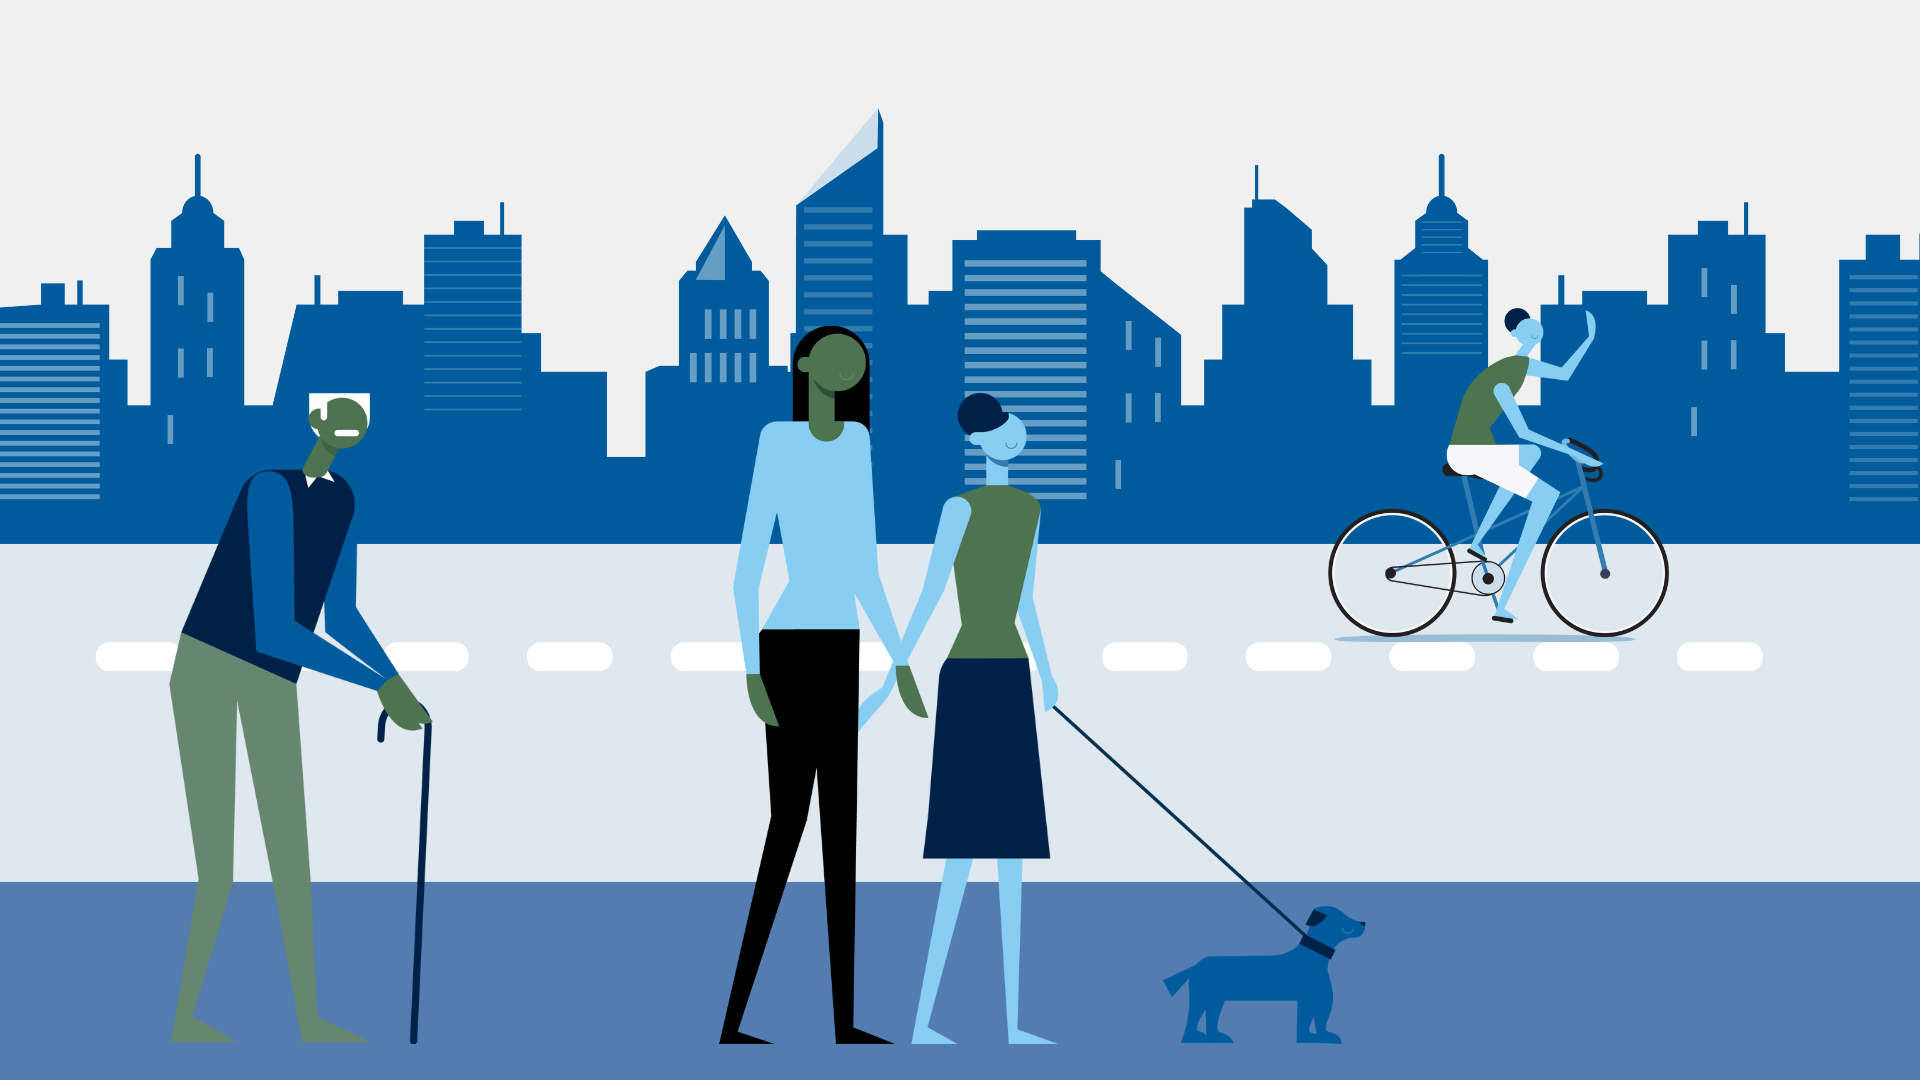 Graphic showing people walking and cycling along a road in front of a city scape